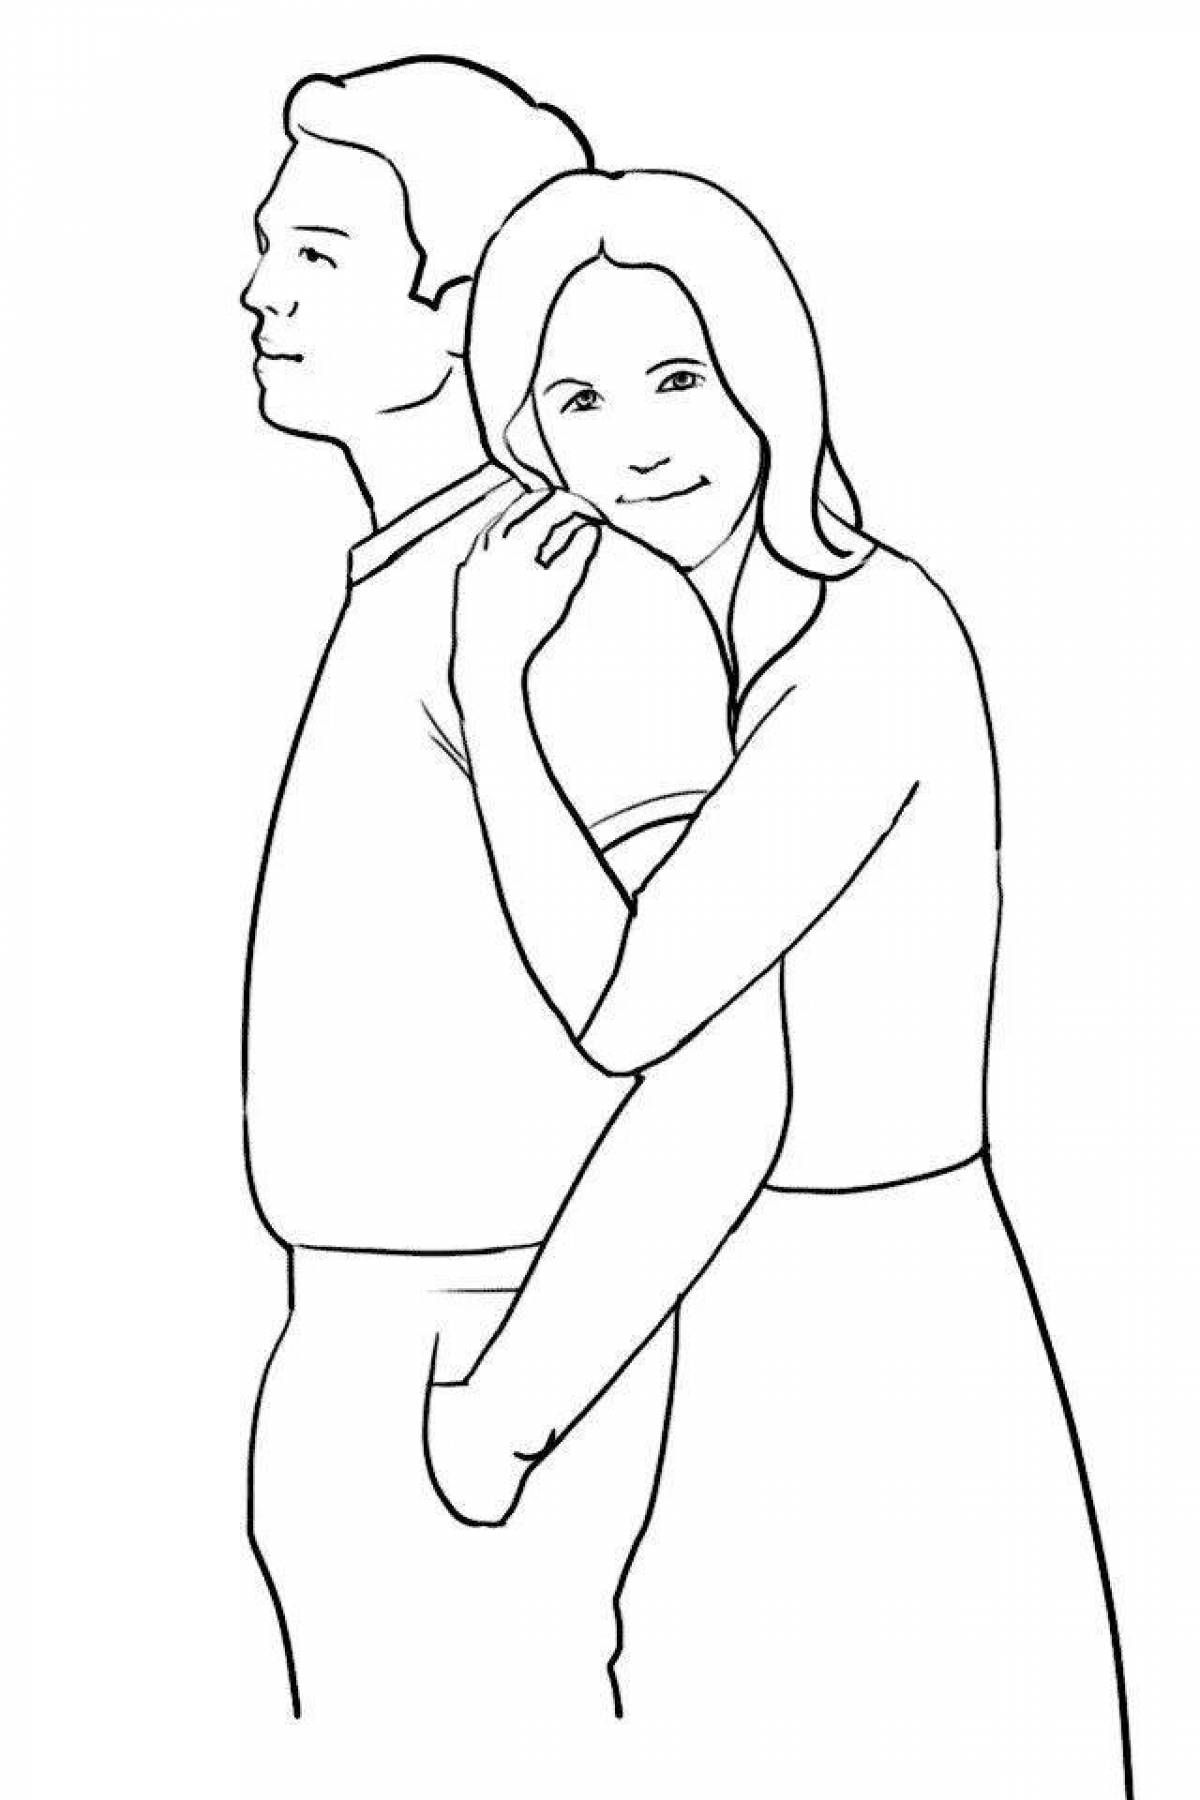 Coloring page shining wife and husband